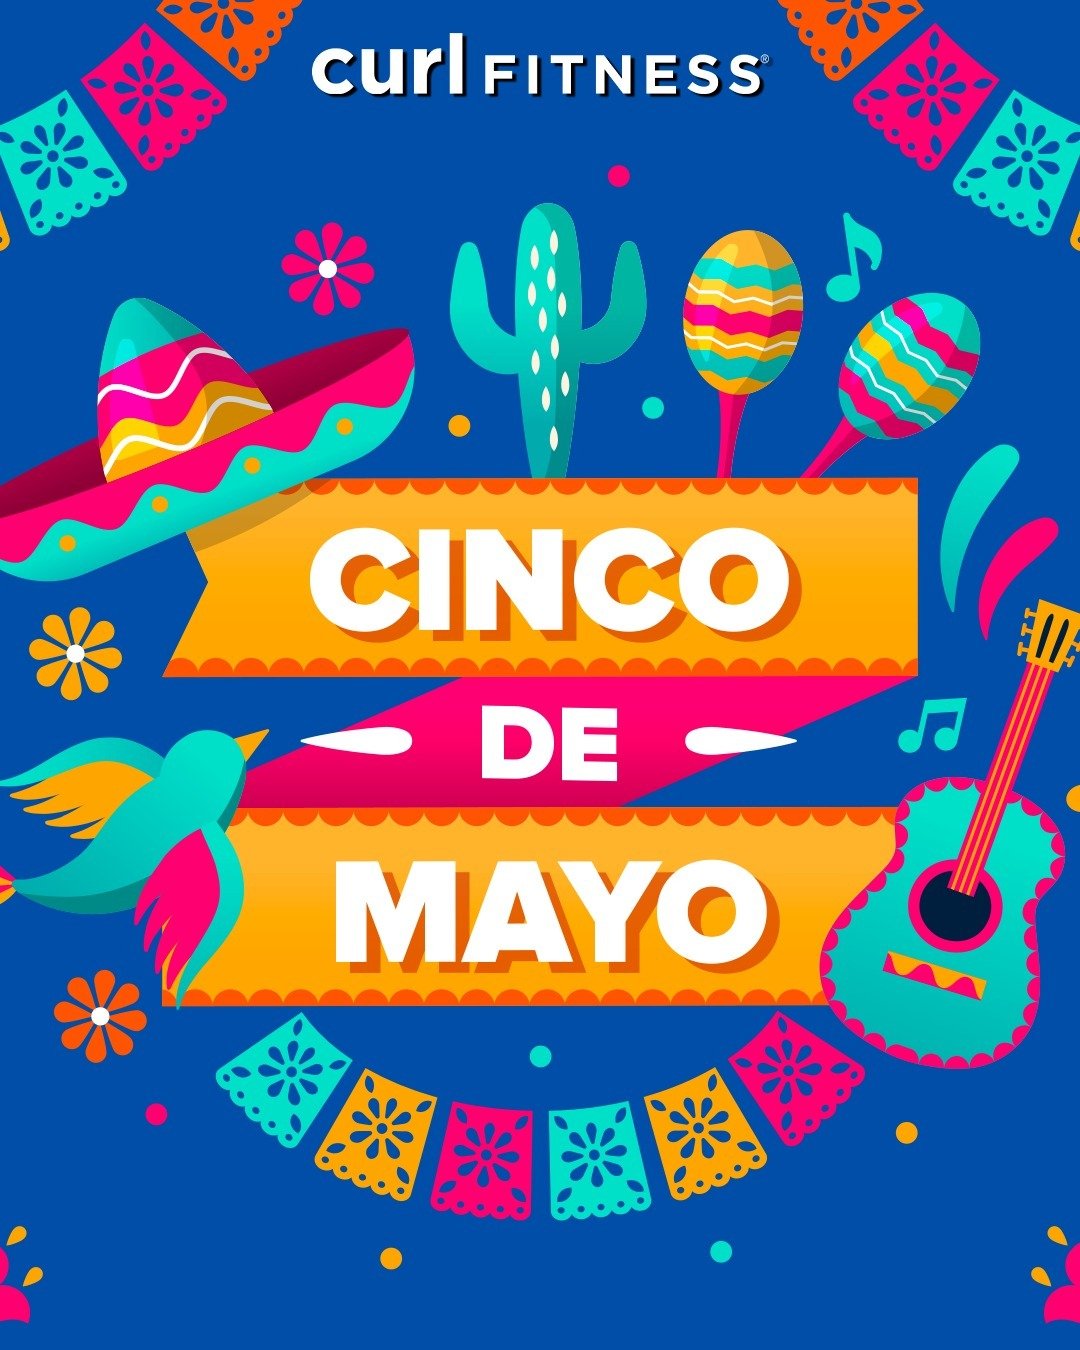 Who is Celebrating Cinco De Mayo at the Gym?
Come Join Us Today For Some Fitness Fun!!